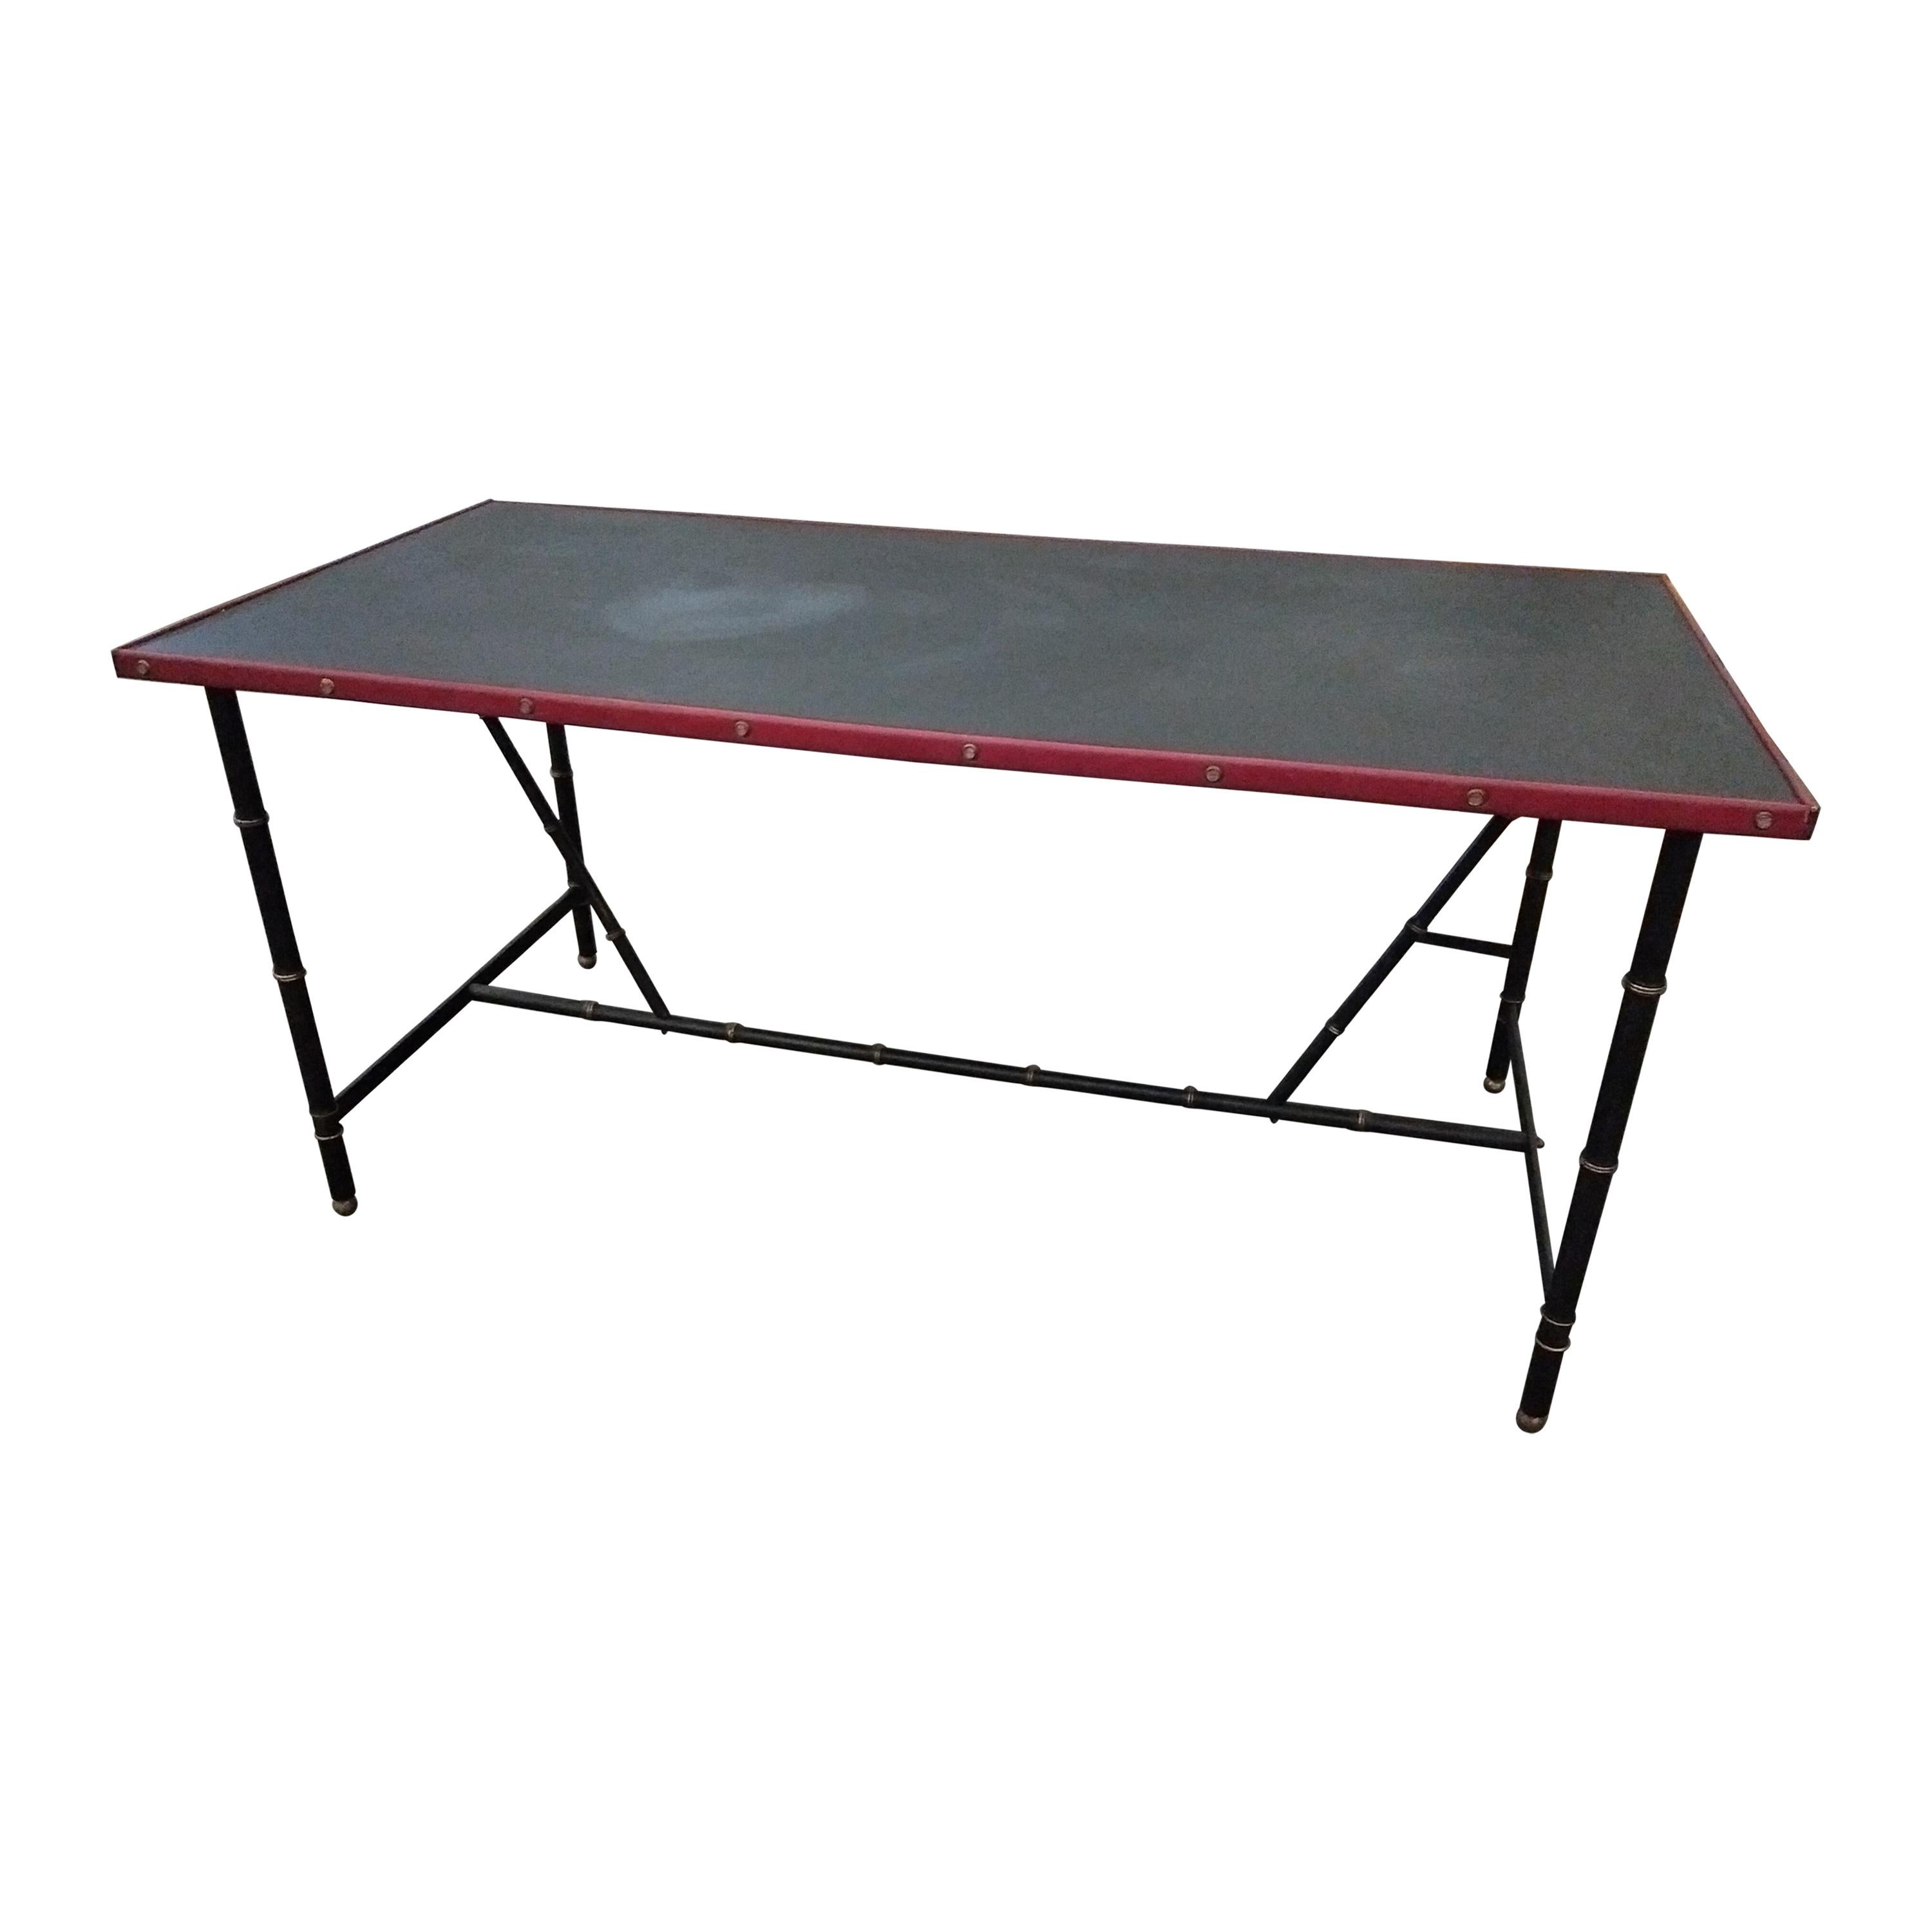 Jacques Adnet Red and Black Leather Desk, Bamboo Style Metal Frame, French, 1950 For Sale